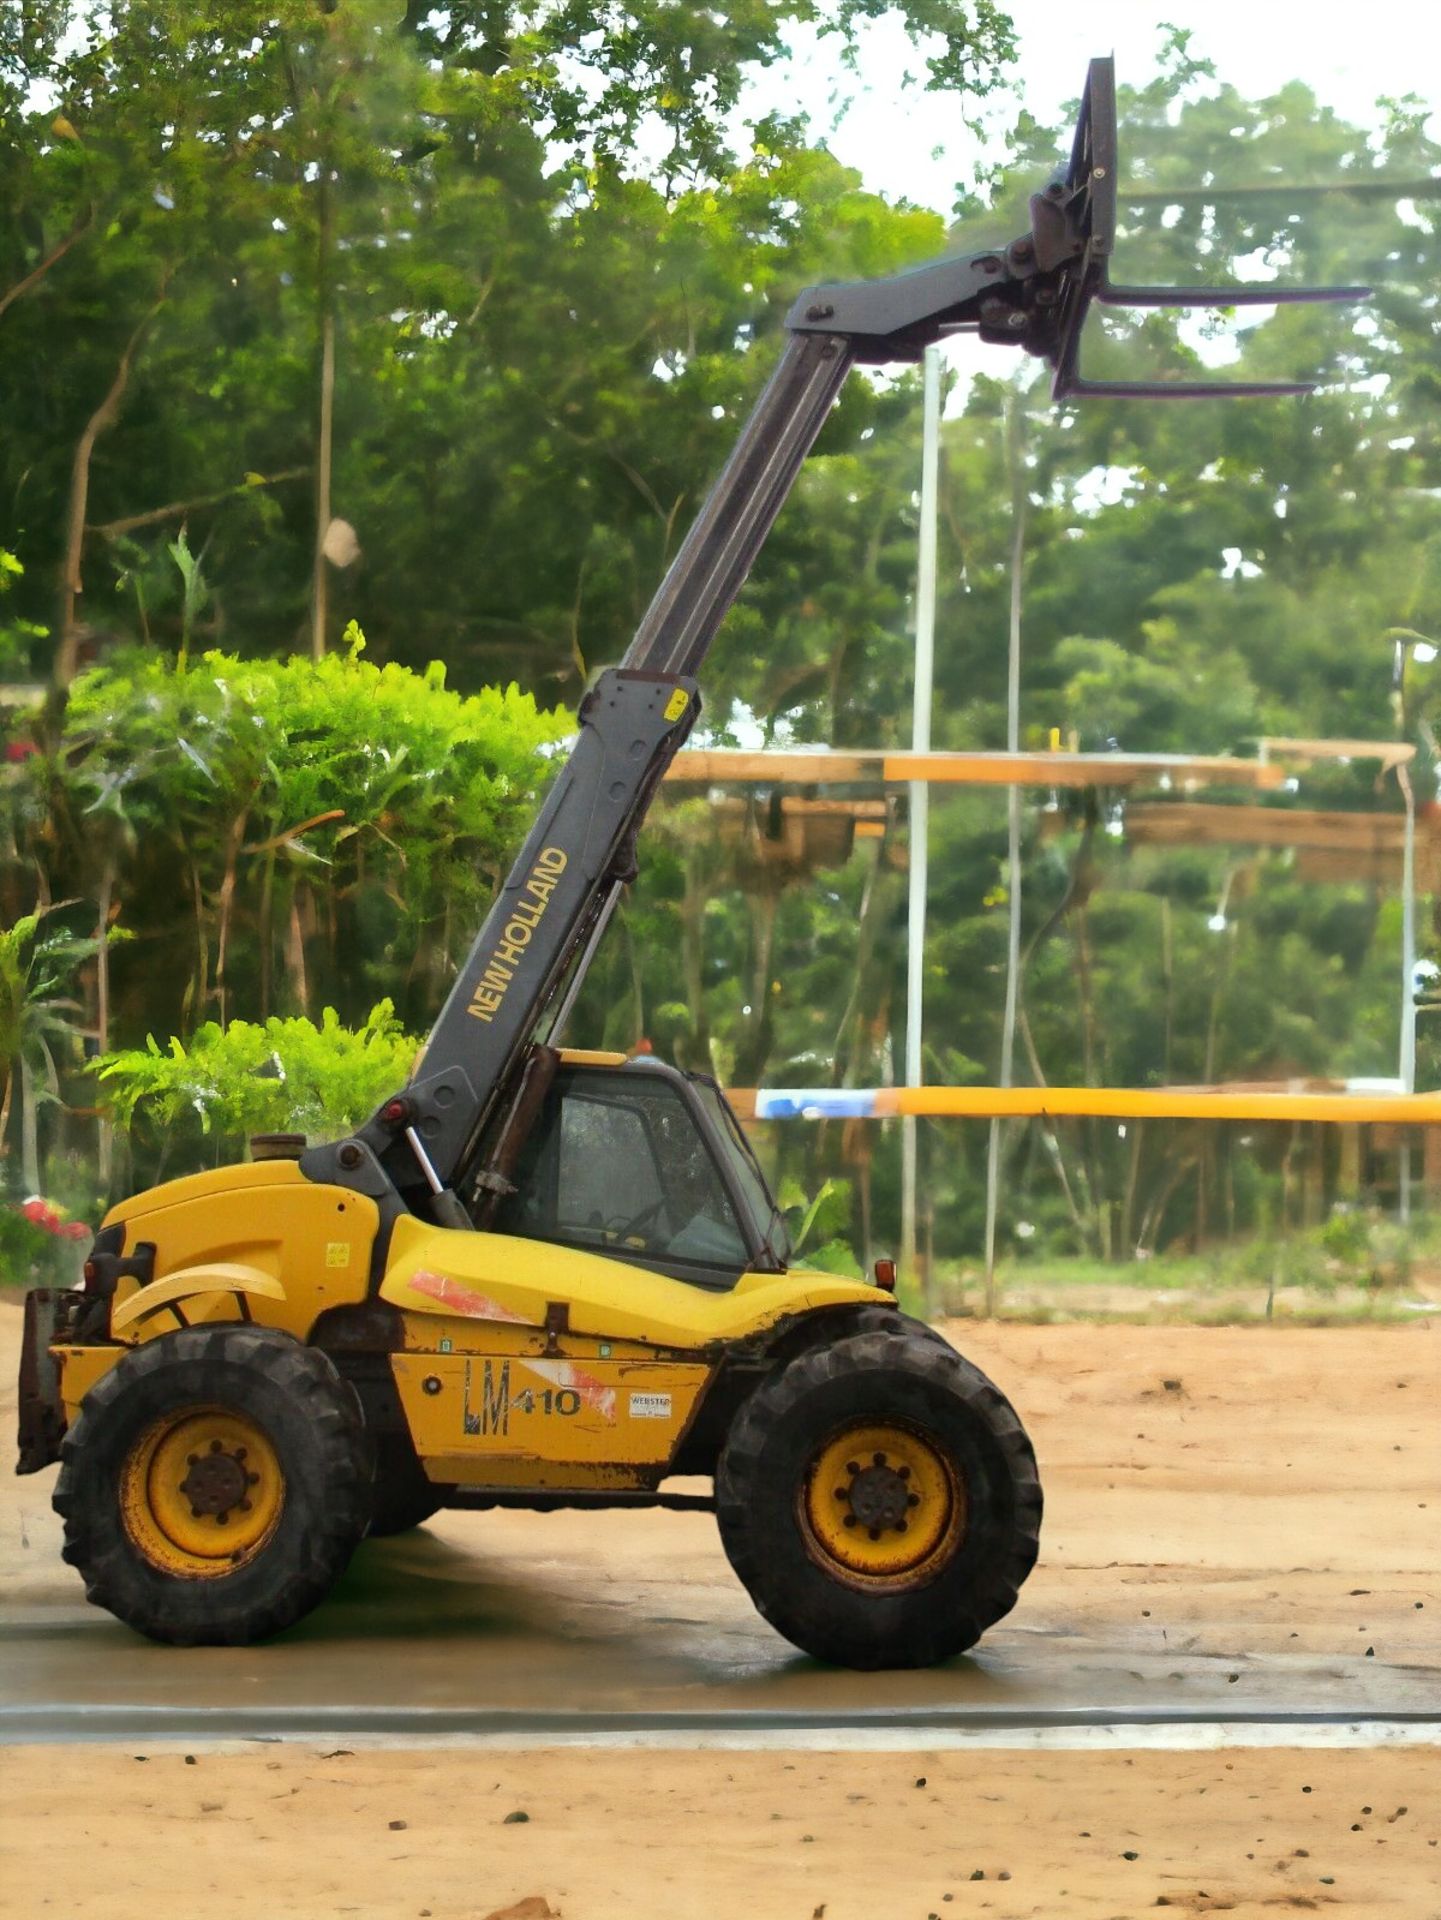 NEW HOLLAND LM410 TELEHANDLER - POWER, PRECISION, AND PERFORMANCE - Image 6 of 10